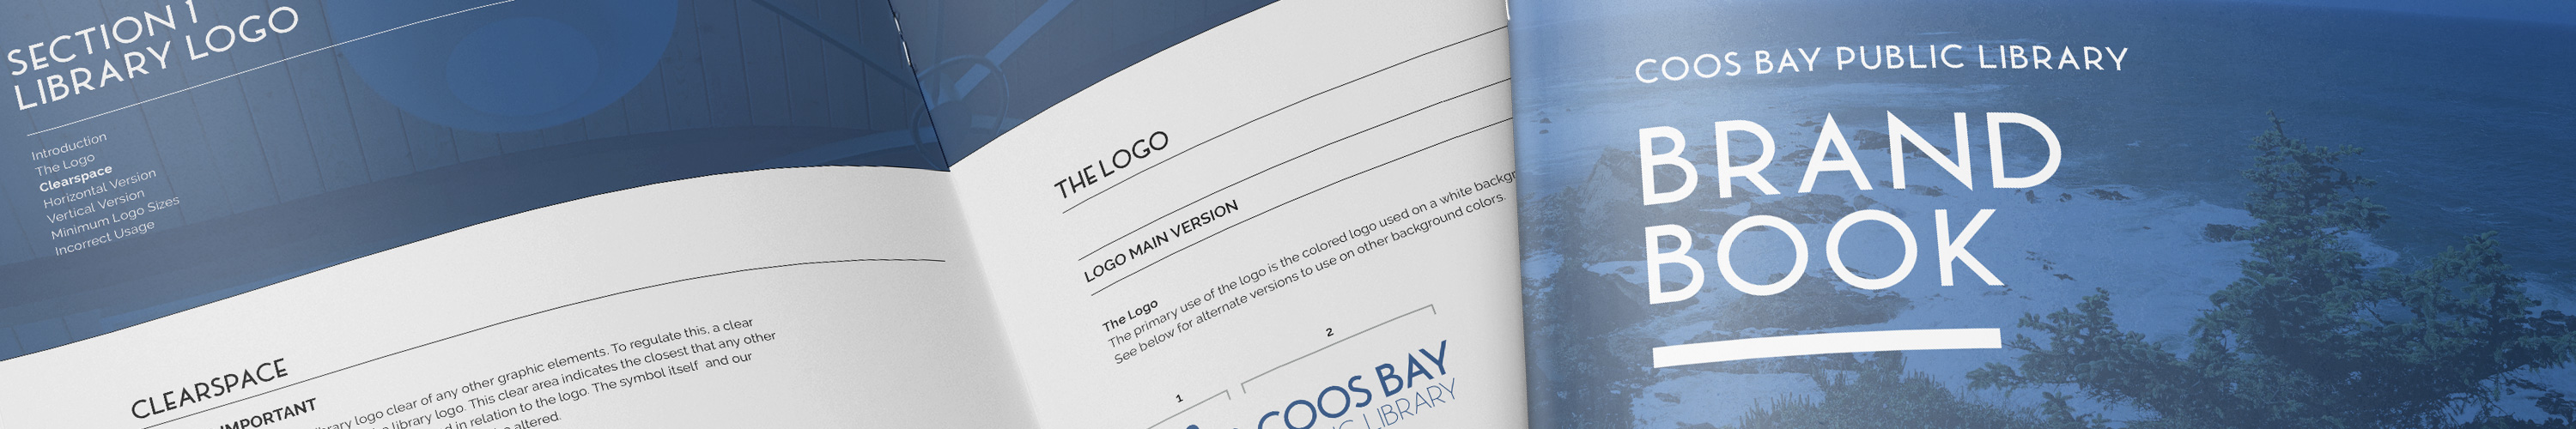 Coos Bay Public Library brand book pages